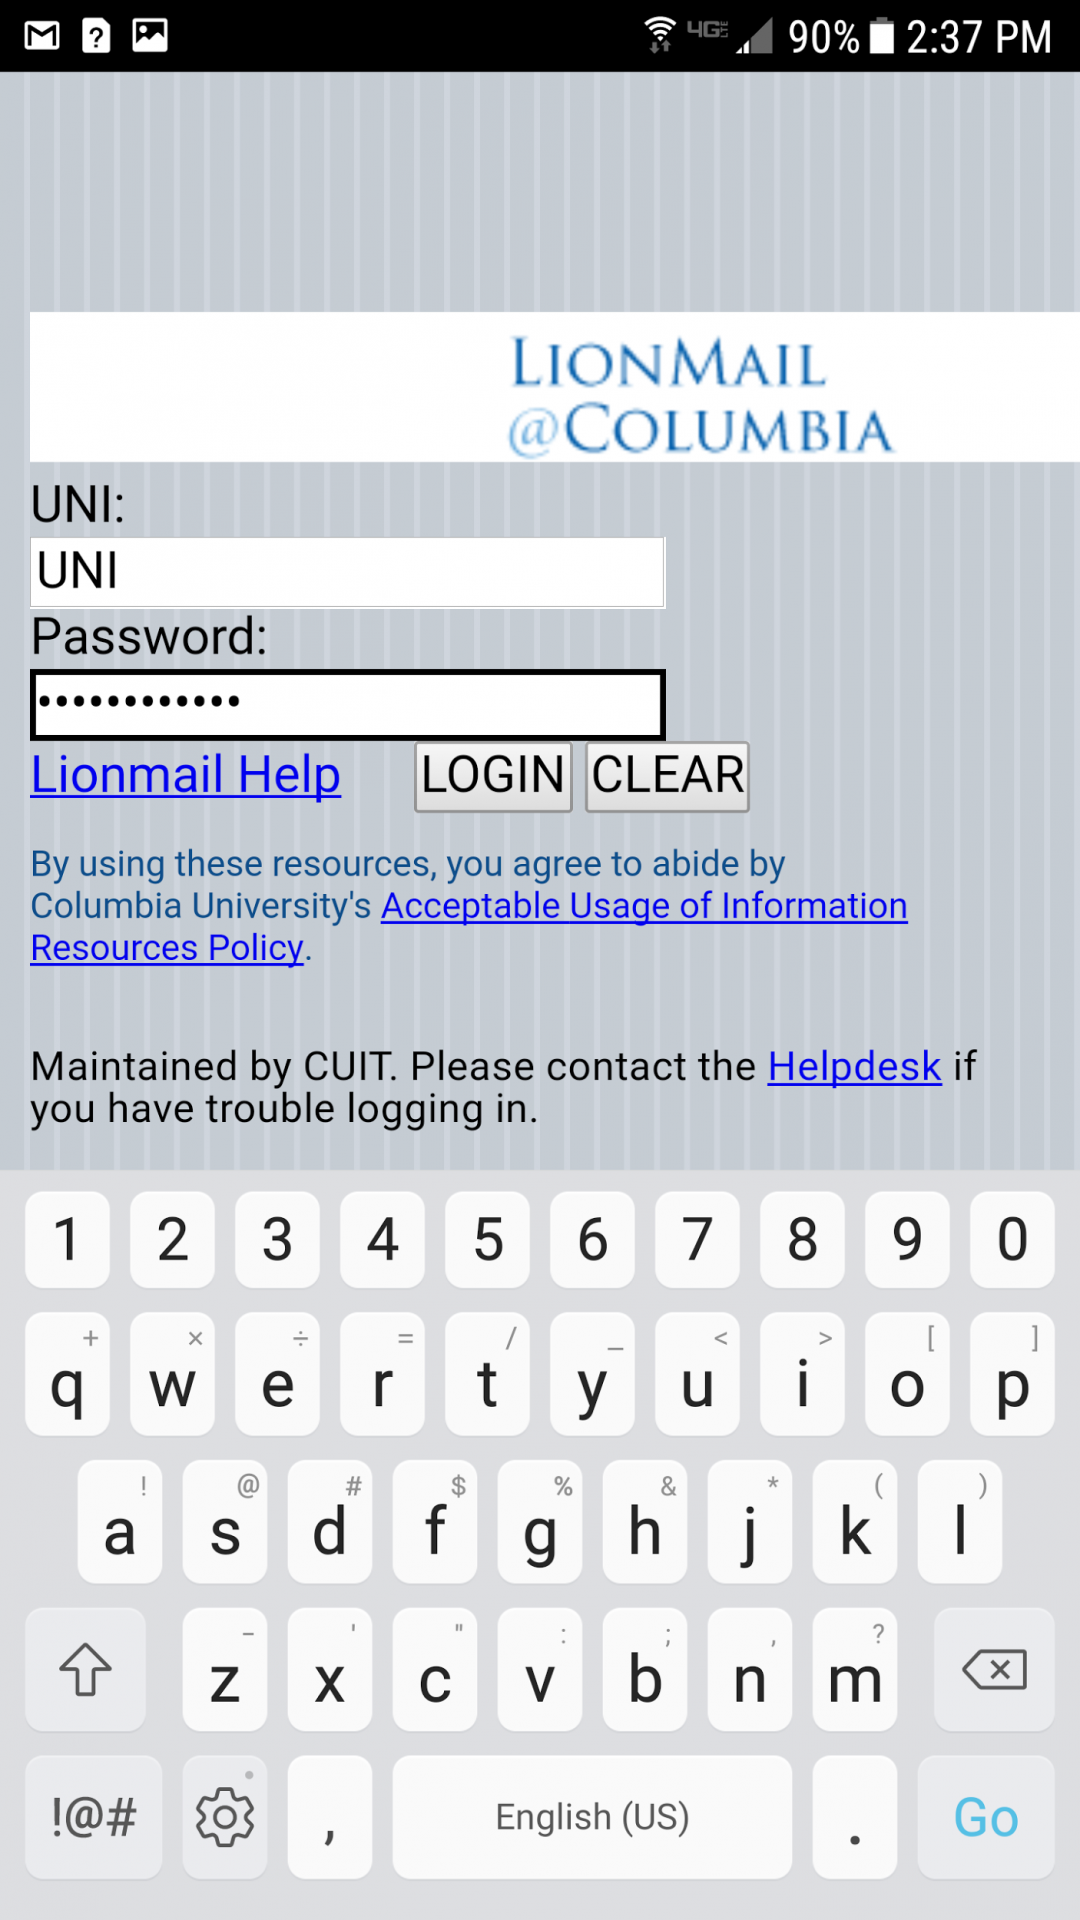 LionMail@Columbia page with UNI and password completed